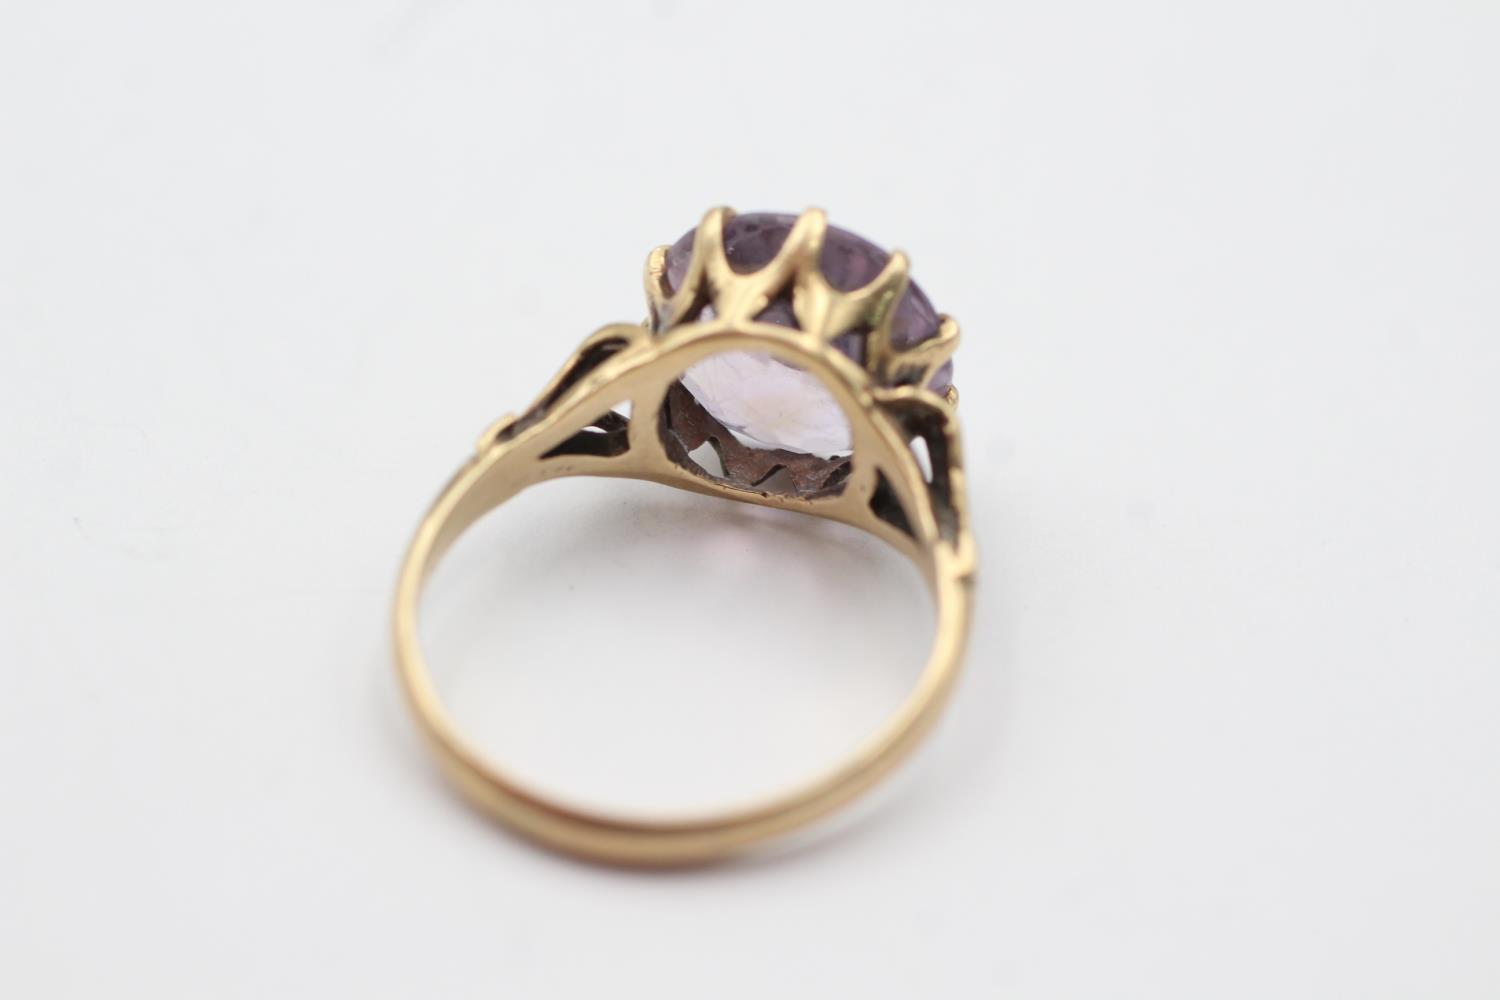 9ct gold round cut amethyst claw set ring (3.5g) Size P - Image 4 of 4